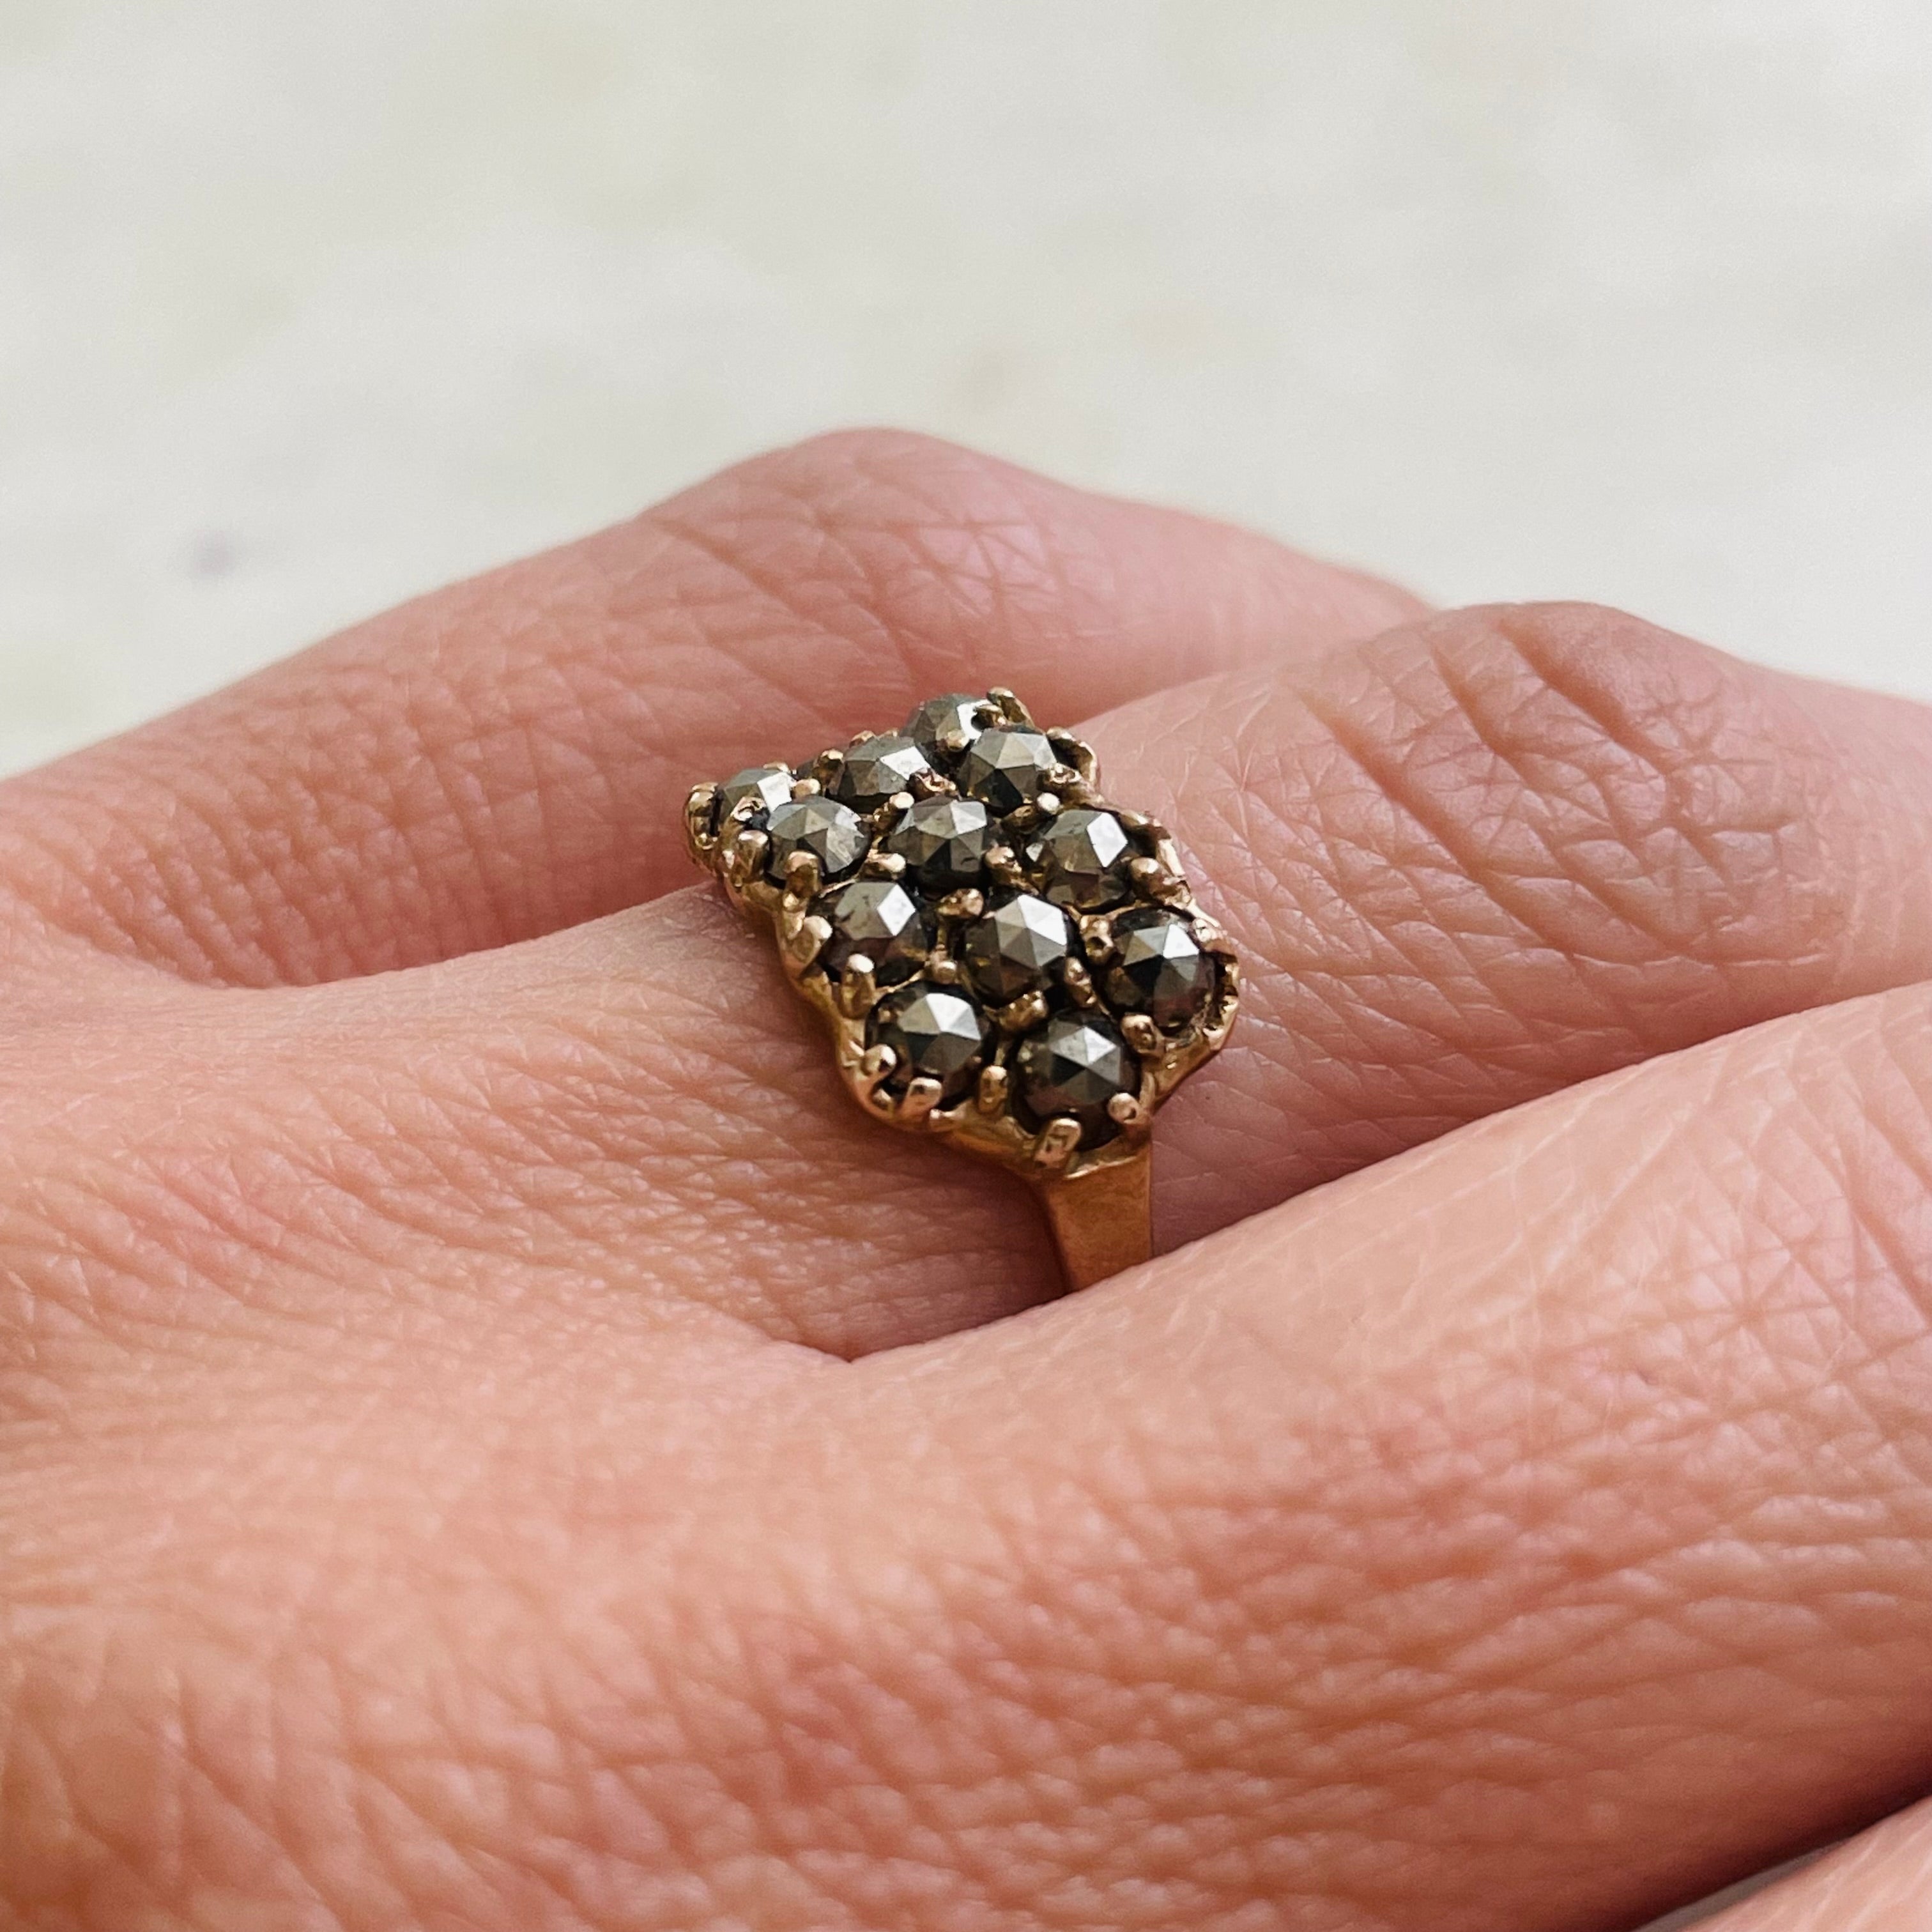 Amazon.com: Unique Pyrite Stone Ring in 14k Gold - Artisan Statement  Jewelry - Handmade Rings for Women - Fashion, Engagement, Wedding, Everyday  Jewelry - Customizable with Engraving : Handmade Products